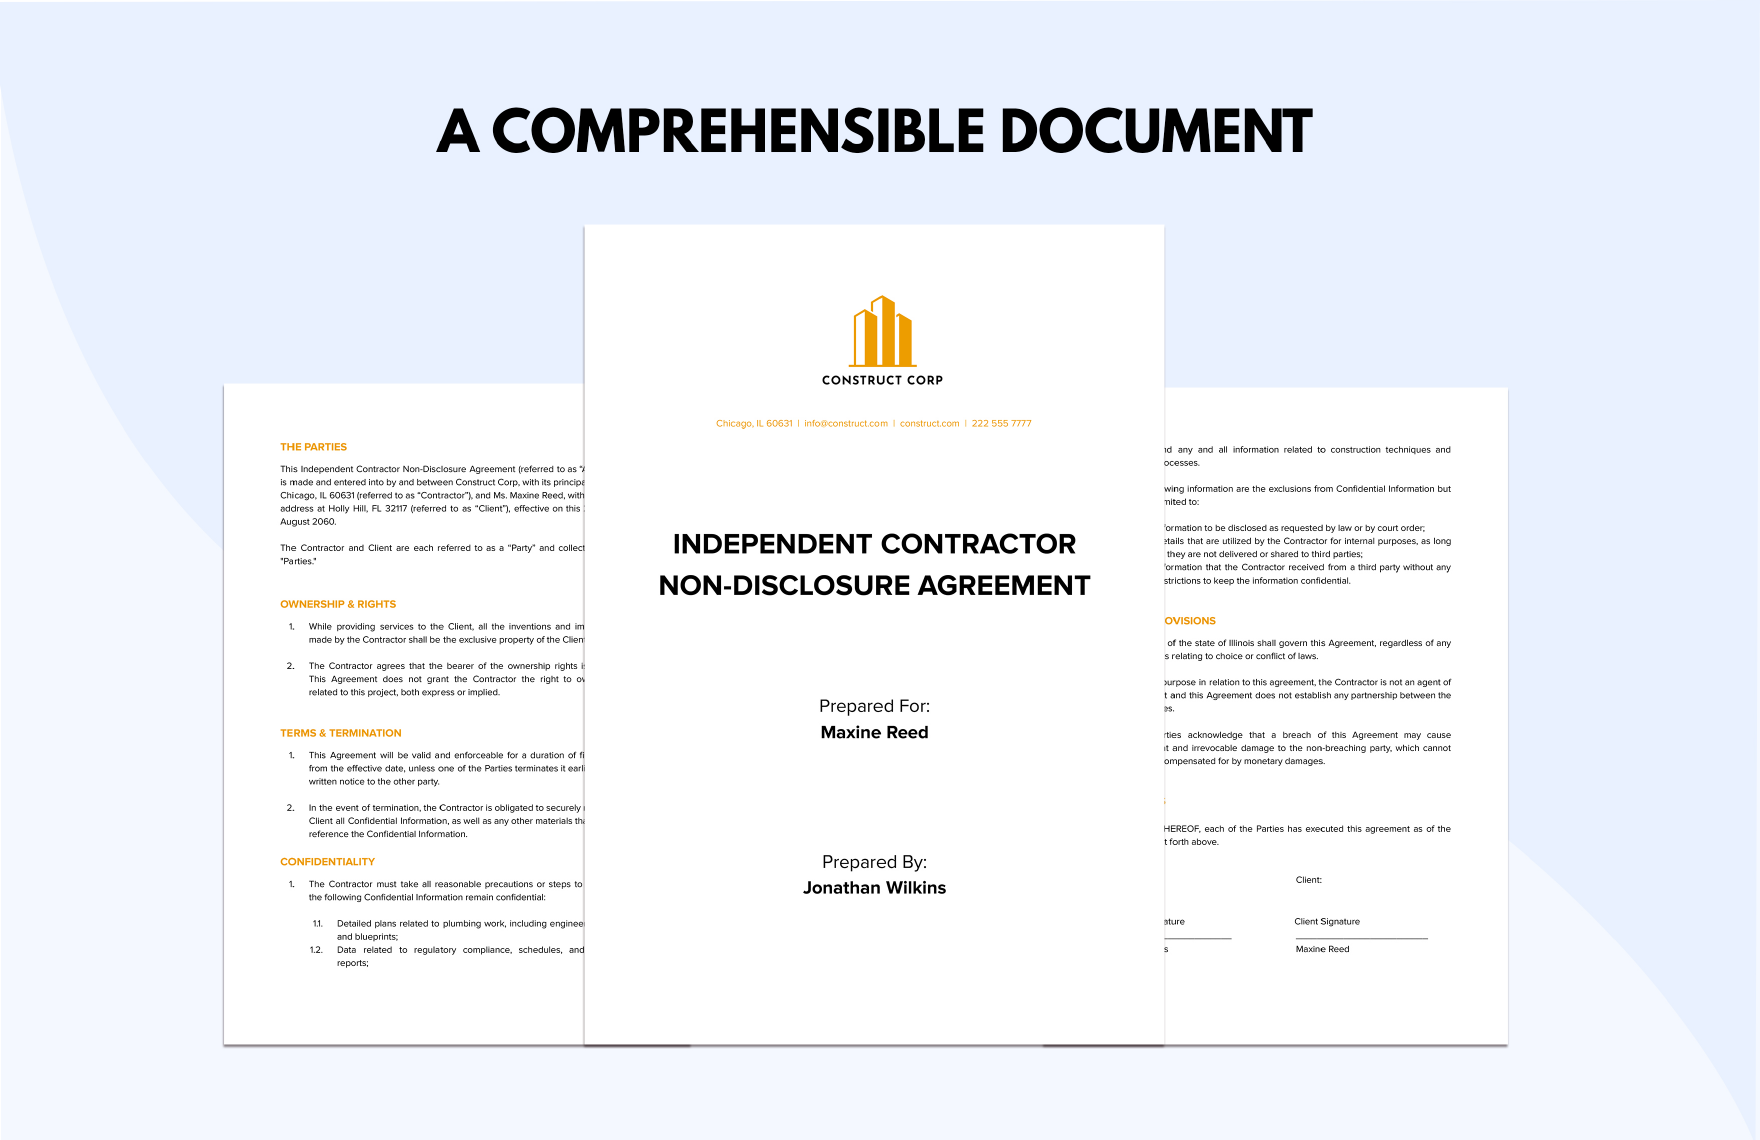 Independent Contractor Non-Disclosure Agreement